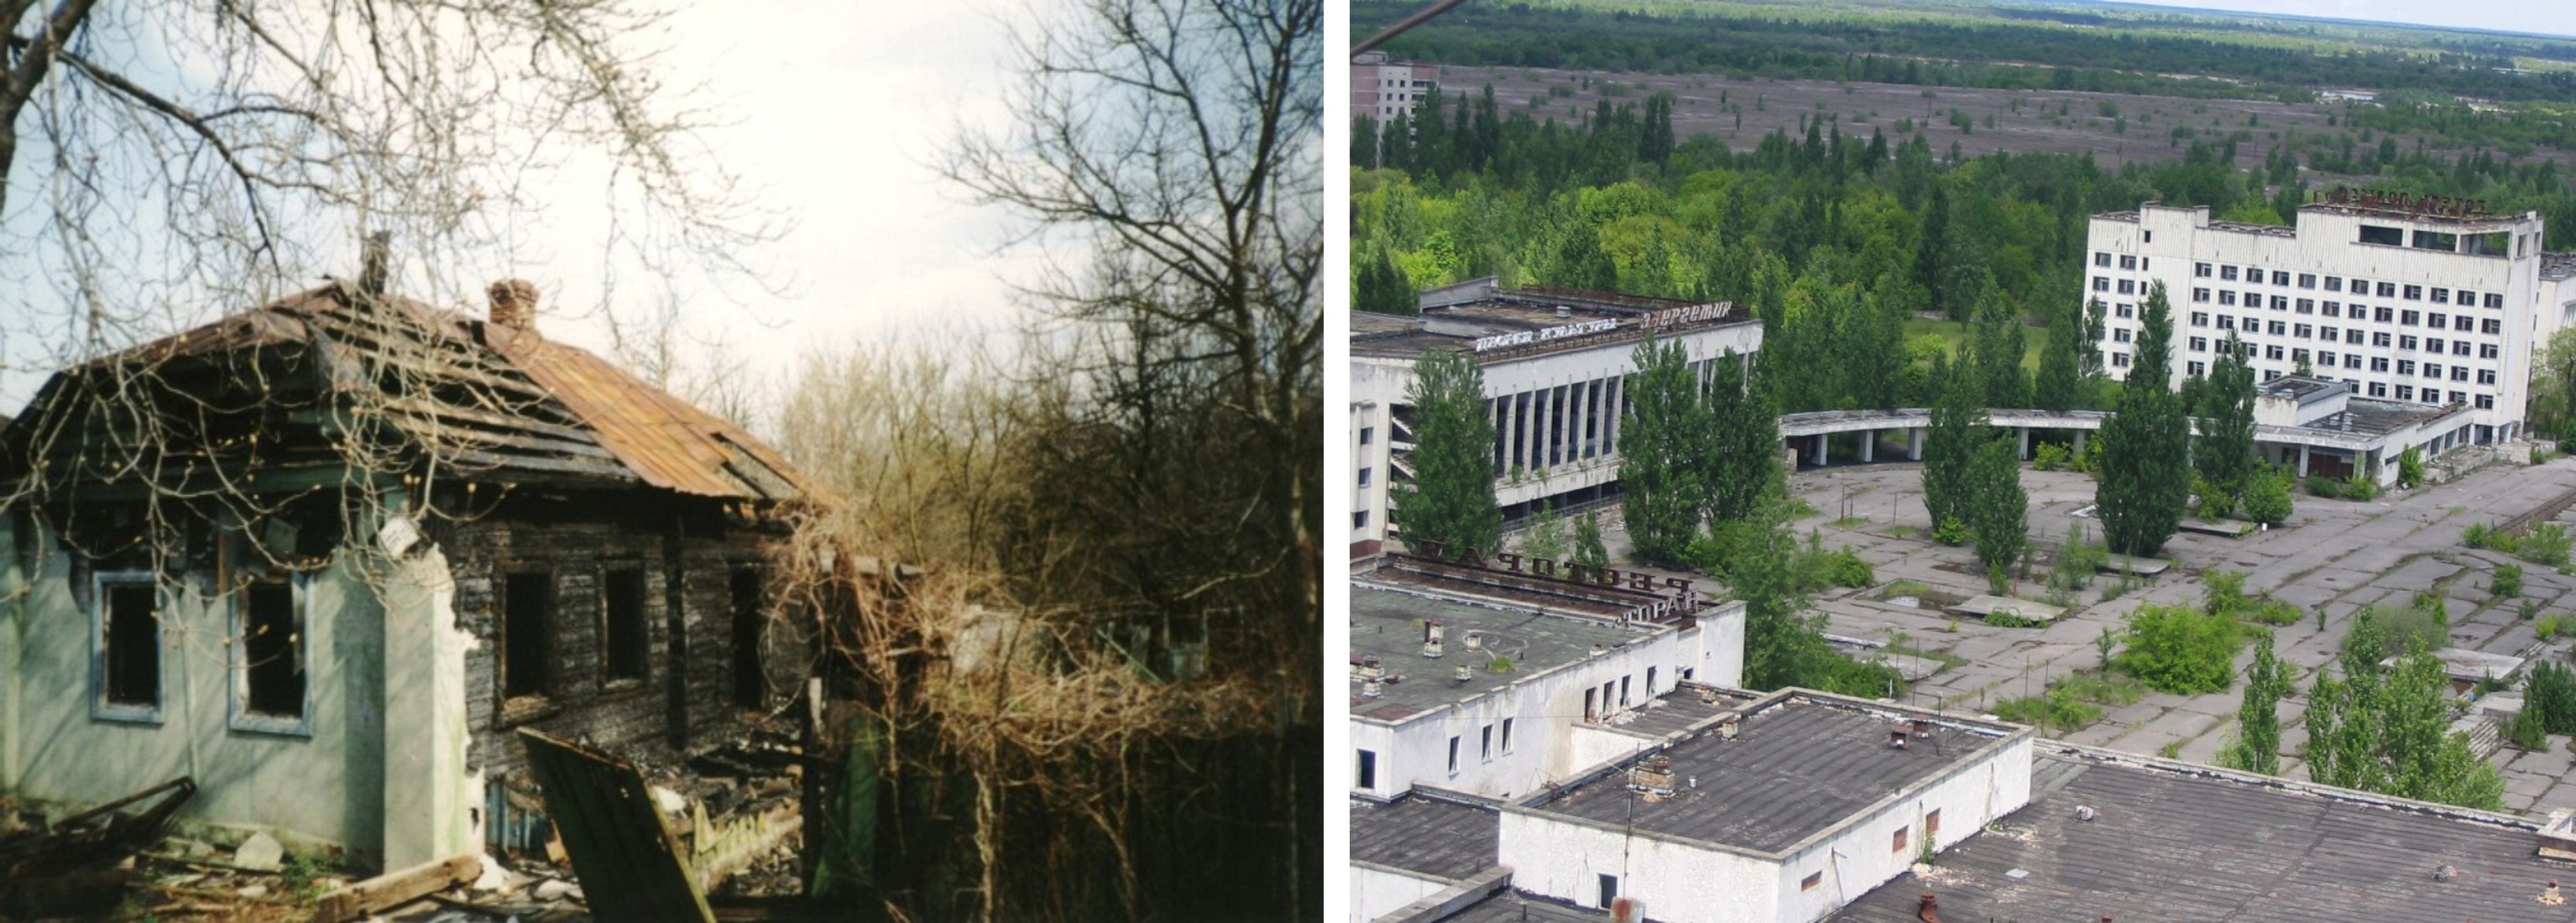 On the left, abandoned house in Pripyat. On the right, a rooftop view of the abandoned city of Pripyat.